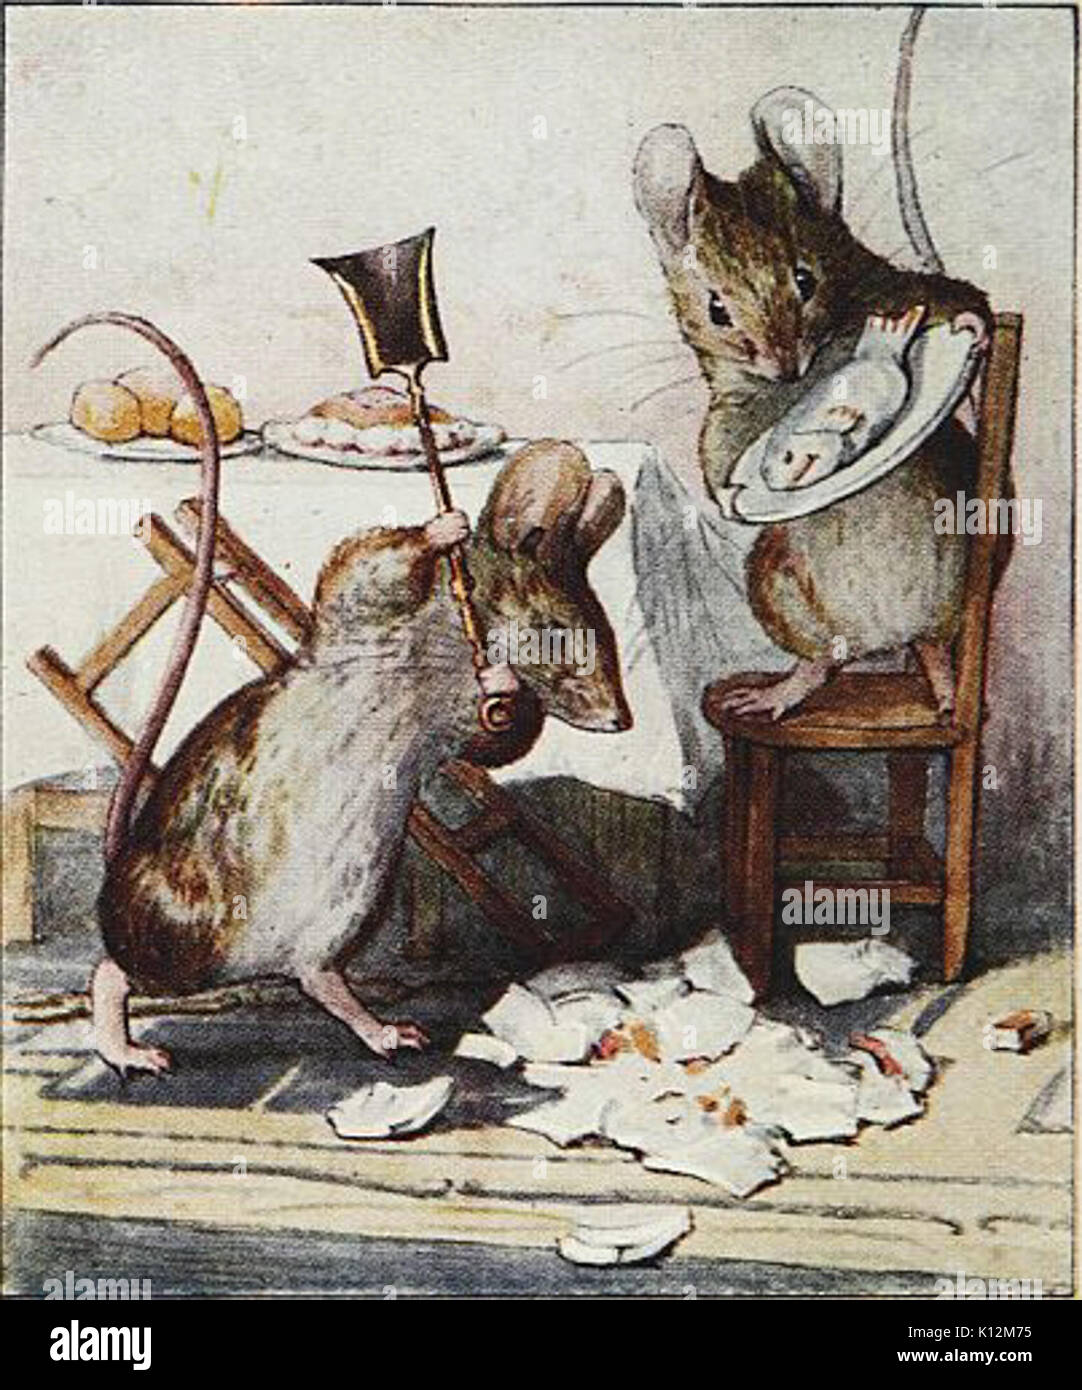 Beatrix Potter The Tale of Two Bad Mice Illustration 11 Stock Photo - Alamy